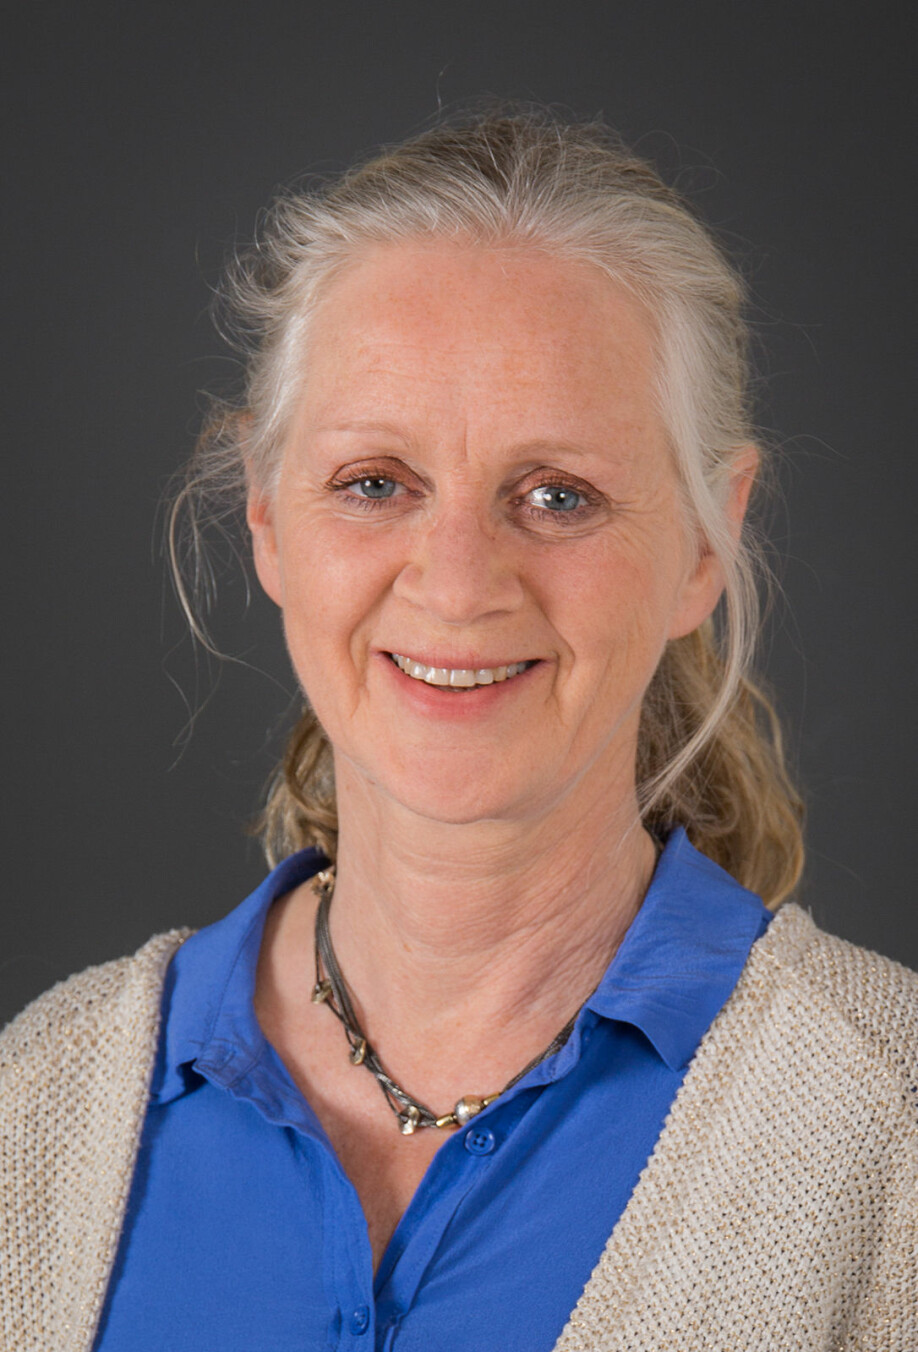 Ragni Hege Kitterød is a researcher in Norway’ Institute for Social Research.